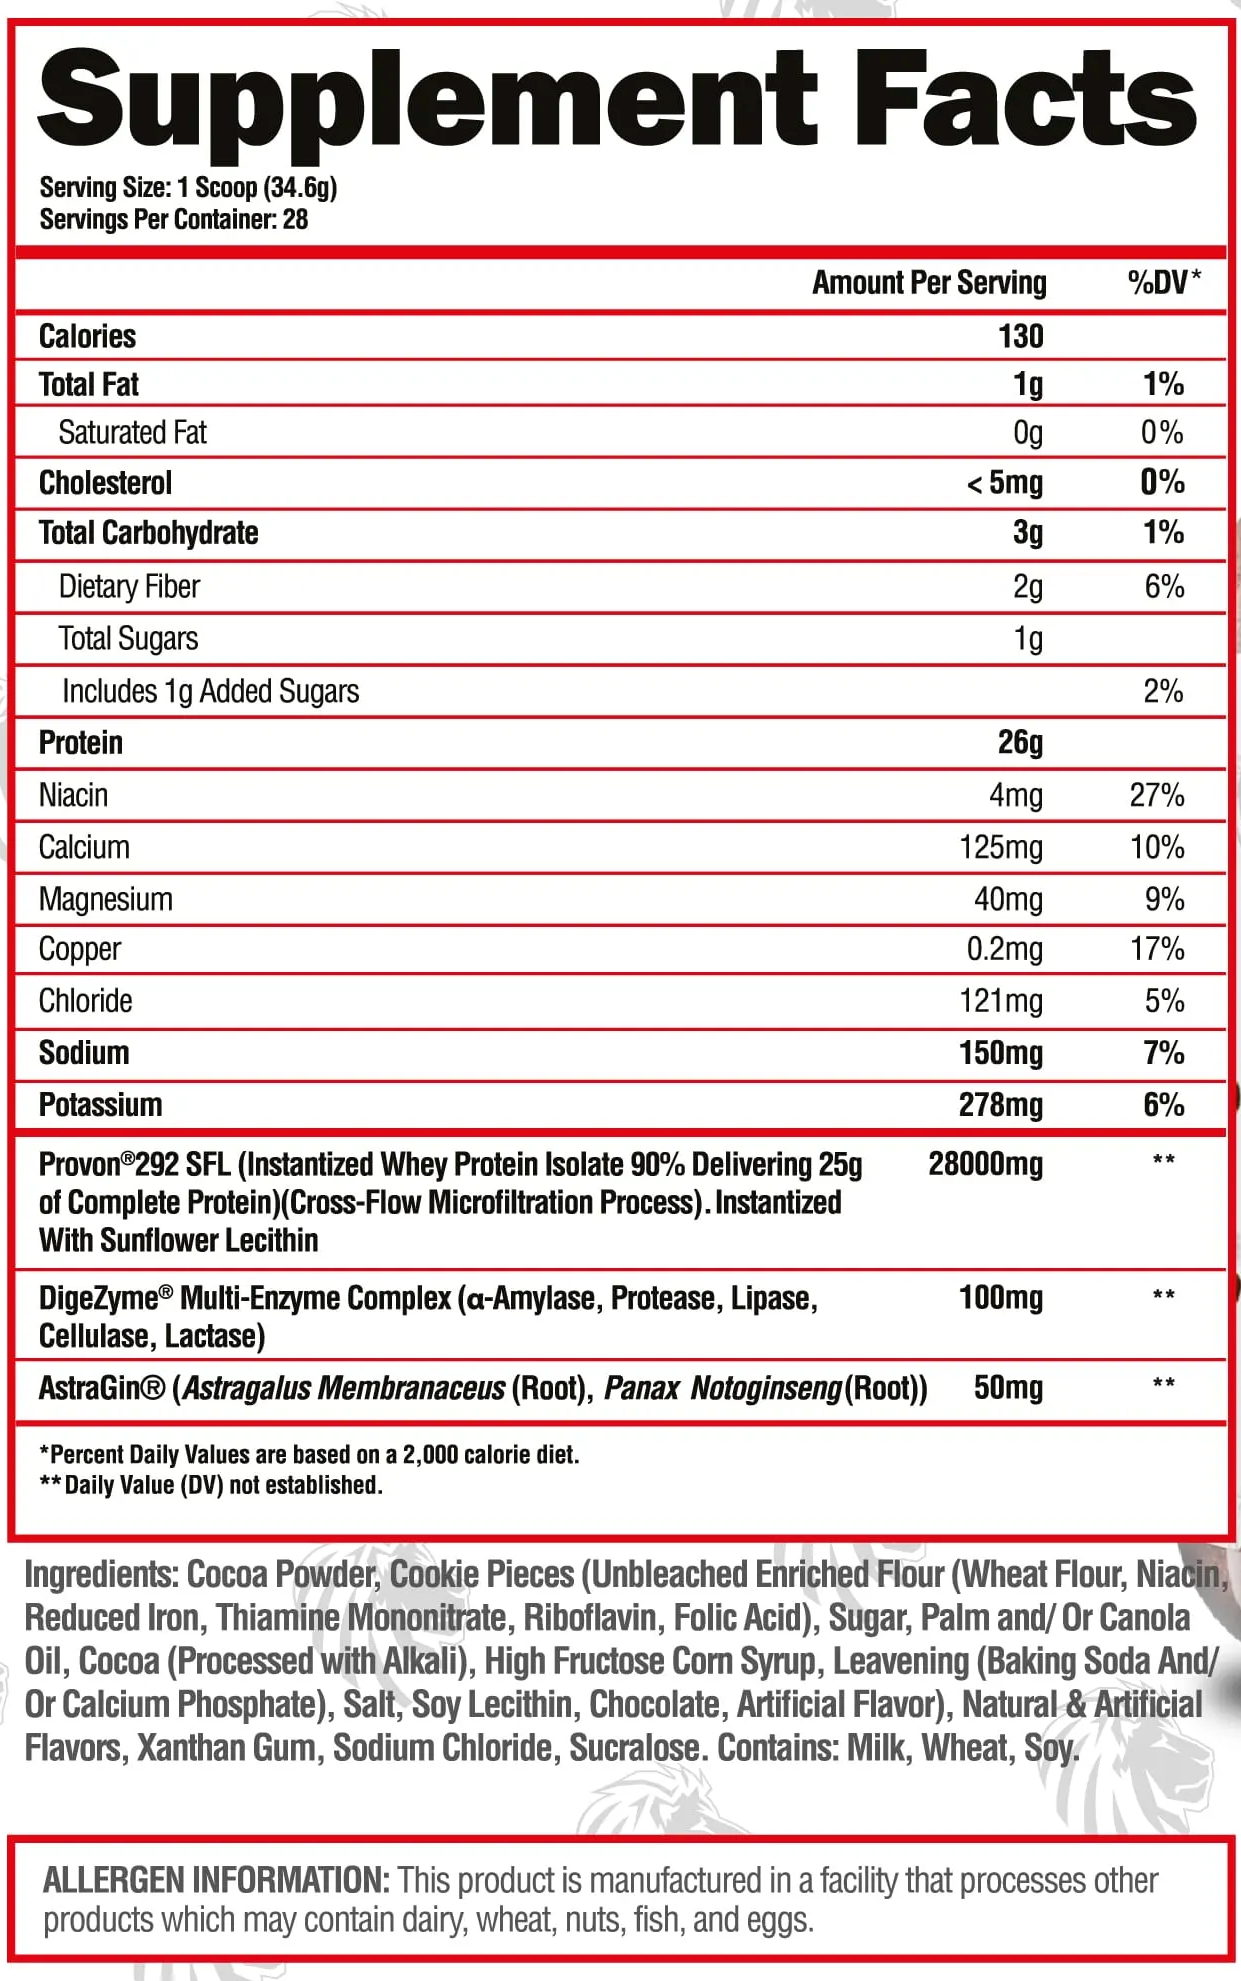 Supplement Facts label showing amount per serving of various nutrients including total fat, cholesterol, carbohydrates, protein, and vitamins. Also lists ingredients.